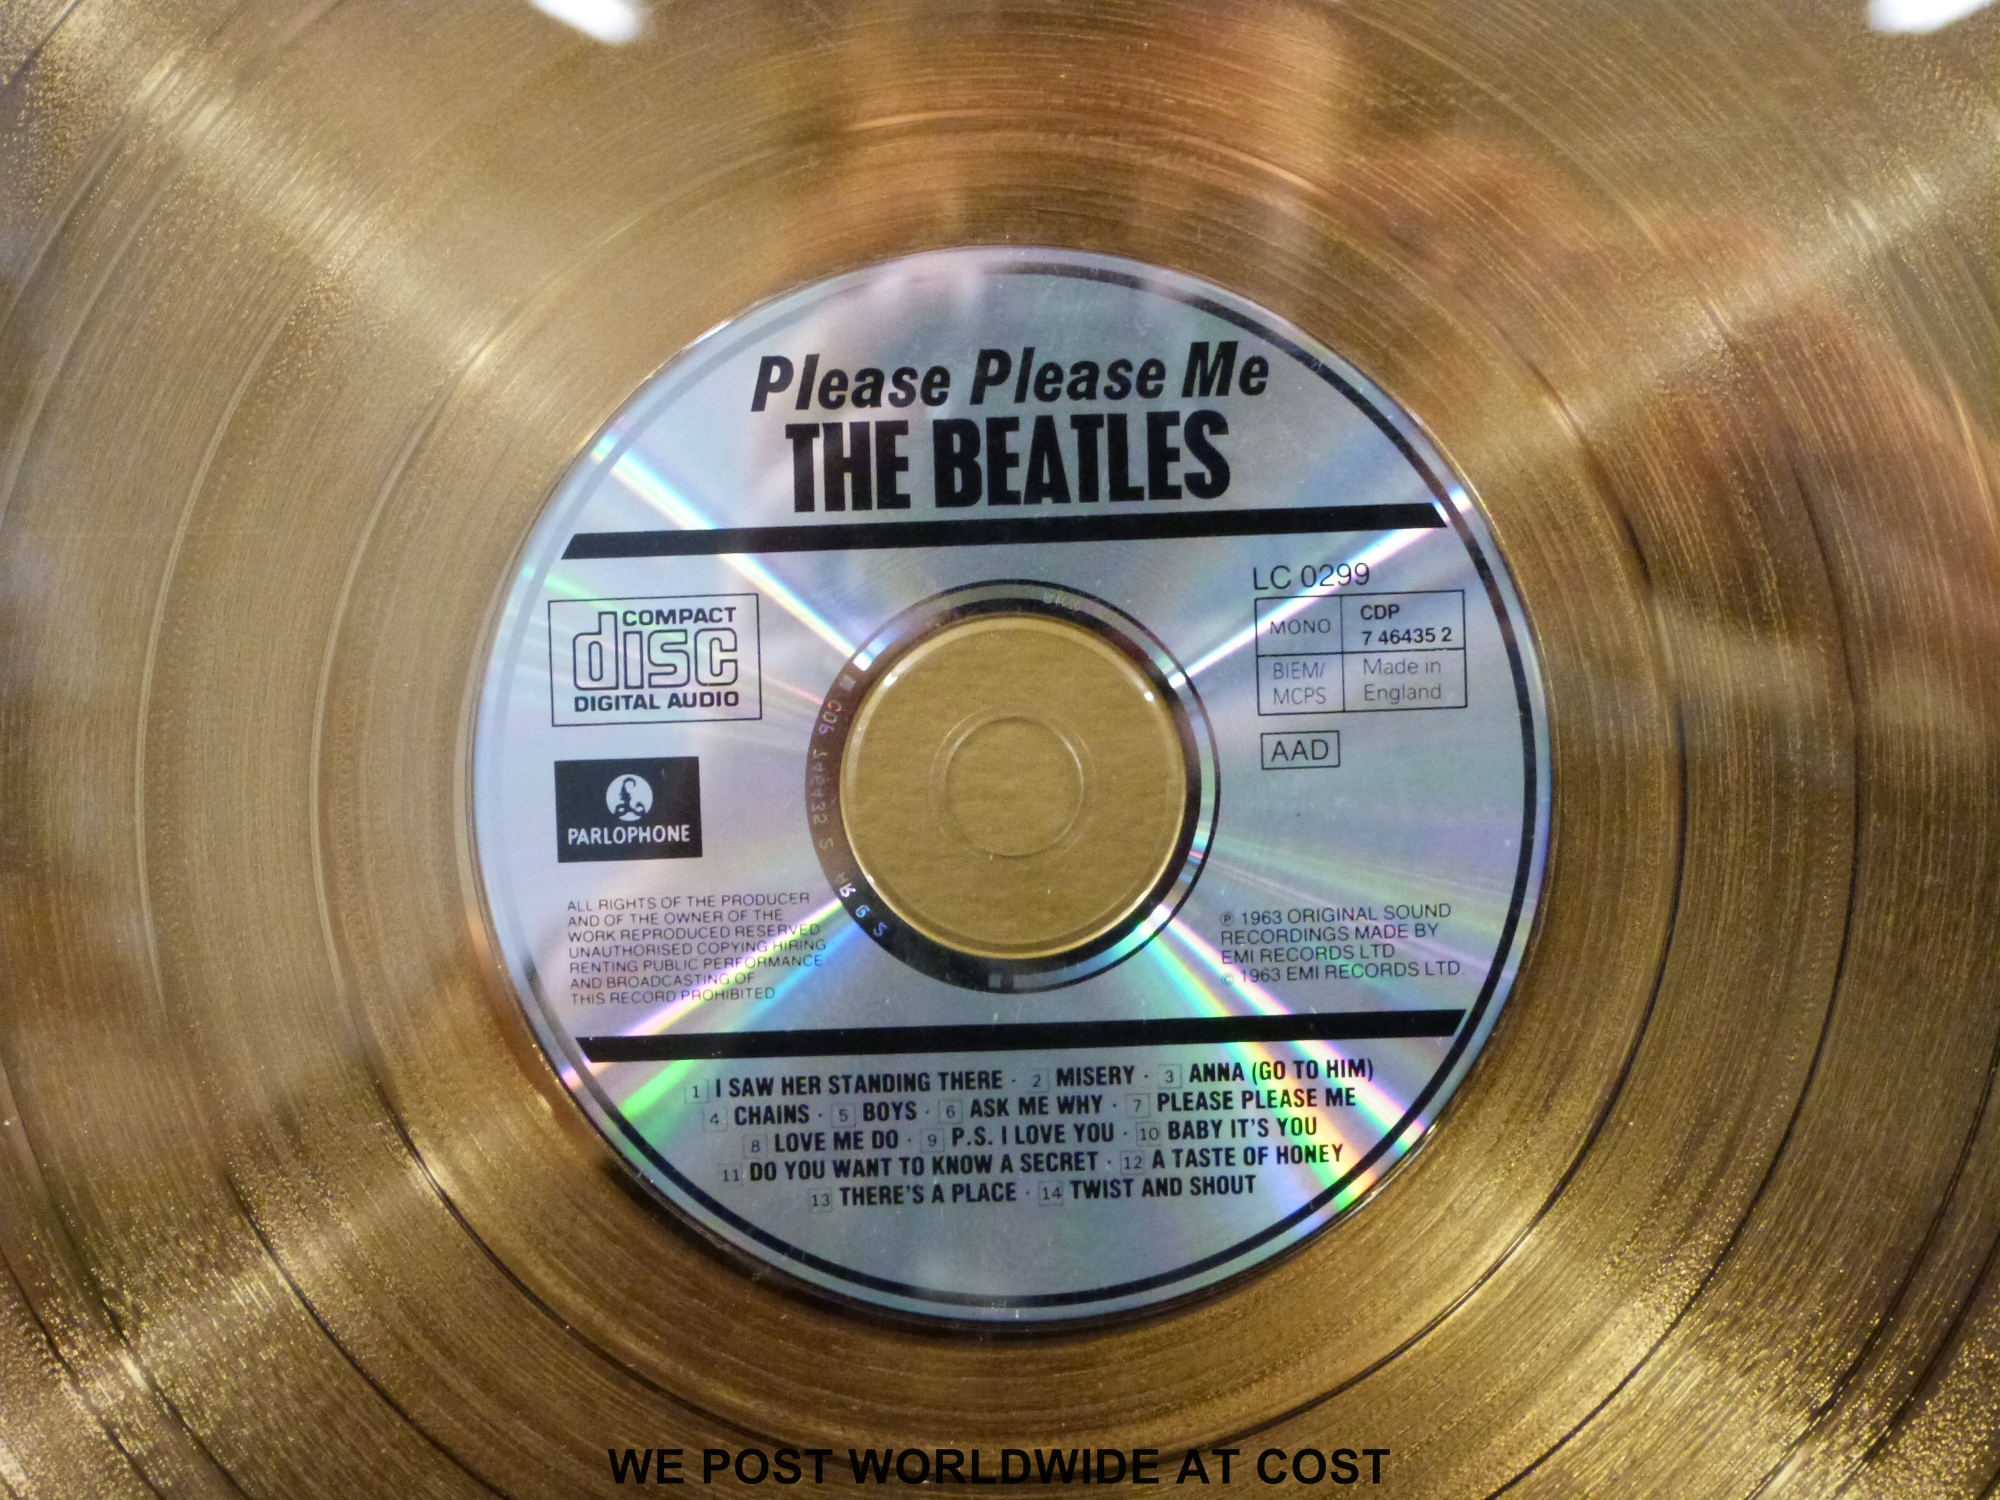 A framed (18” x 23”) “Gold” disc of The Beatles “Please Please Me” LP. - Image 4 of 4